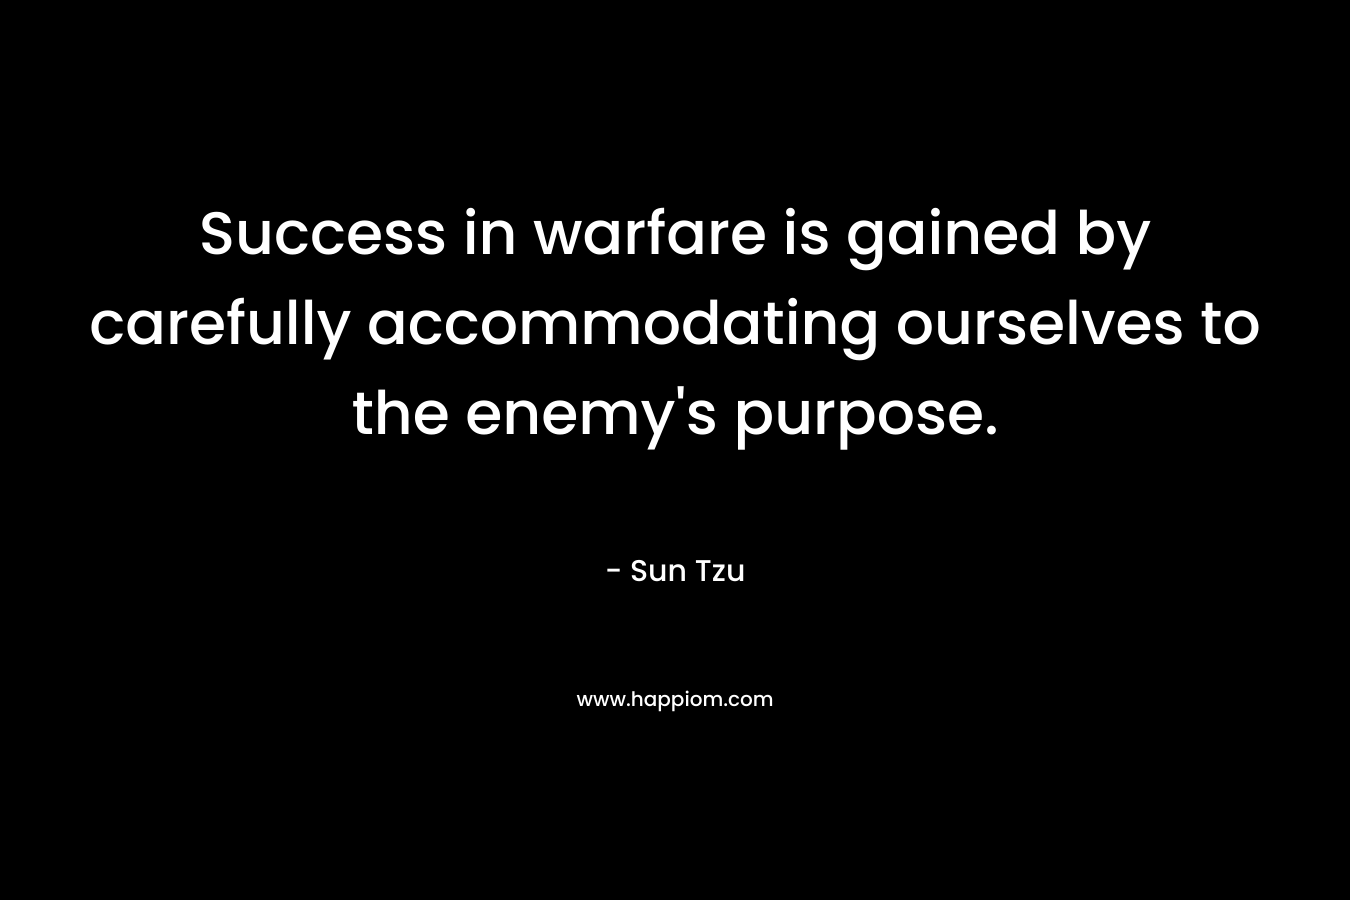 Success in warfare is gained by carefully accommodating ourselves to the enemy’s purpose. – Sun Tzu